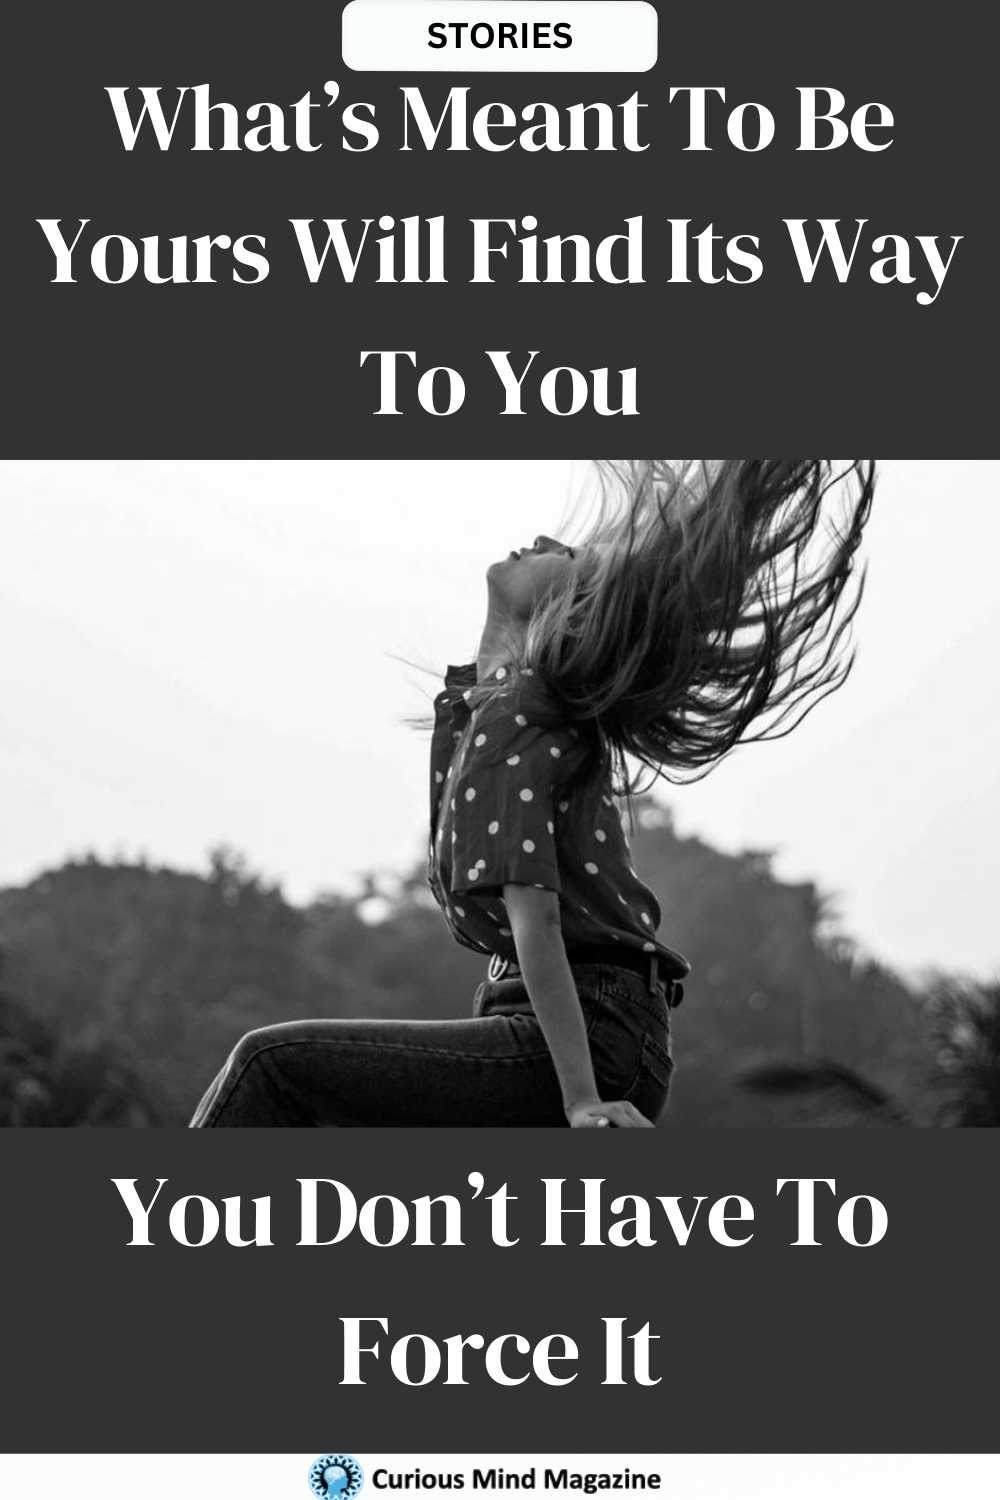 What’s Meant To Be Yours Will Find Its Way To You – You Don’t Have To Force It